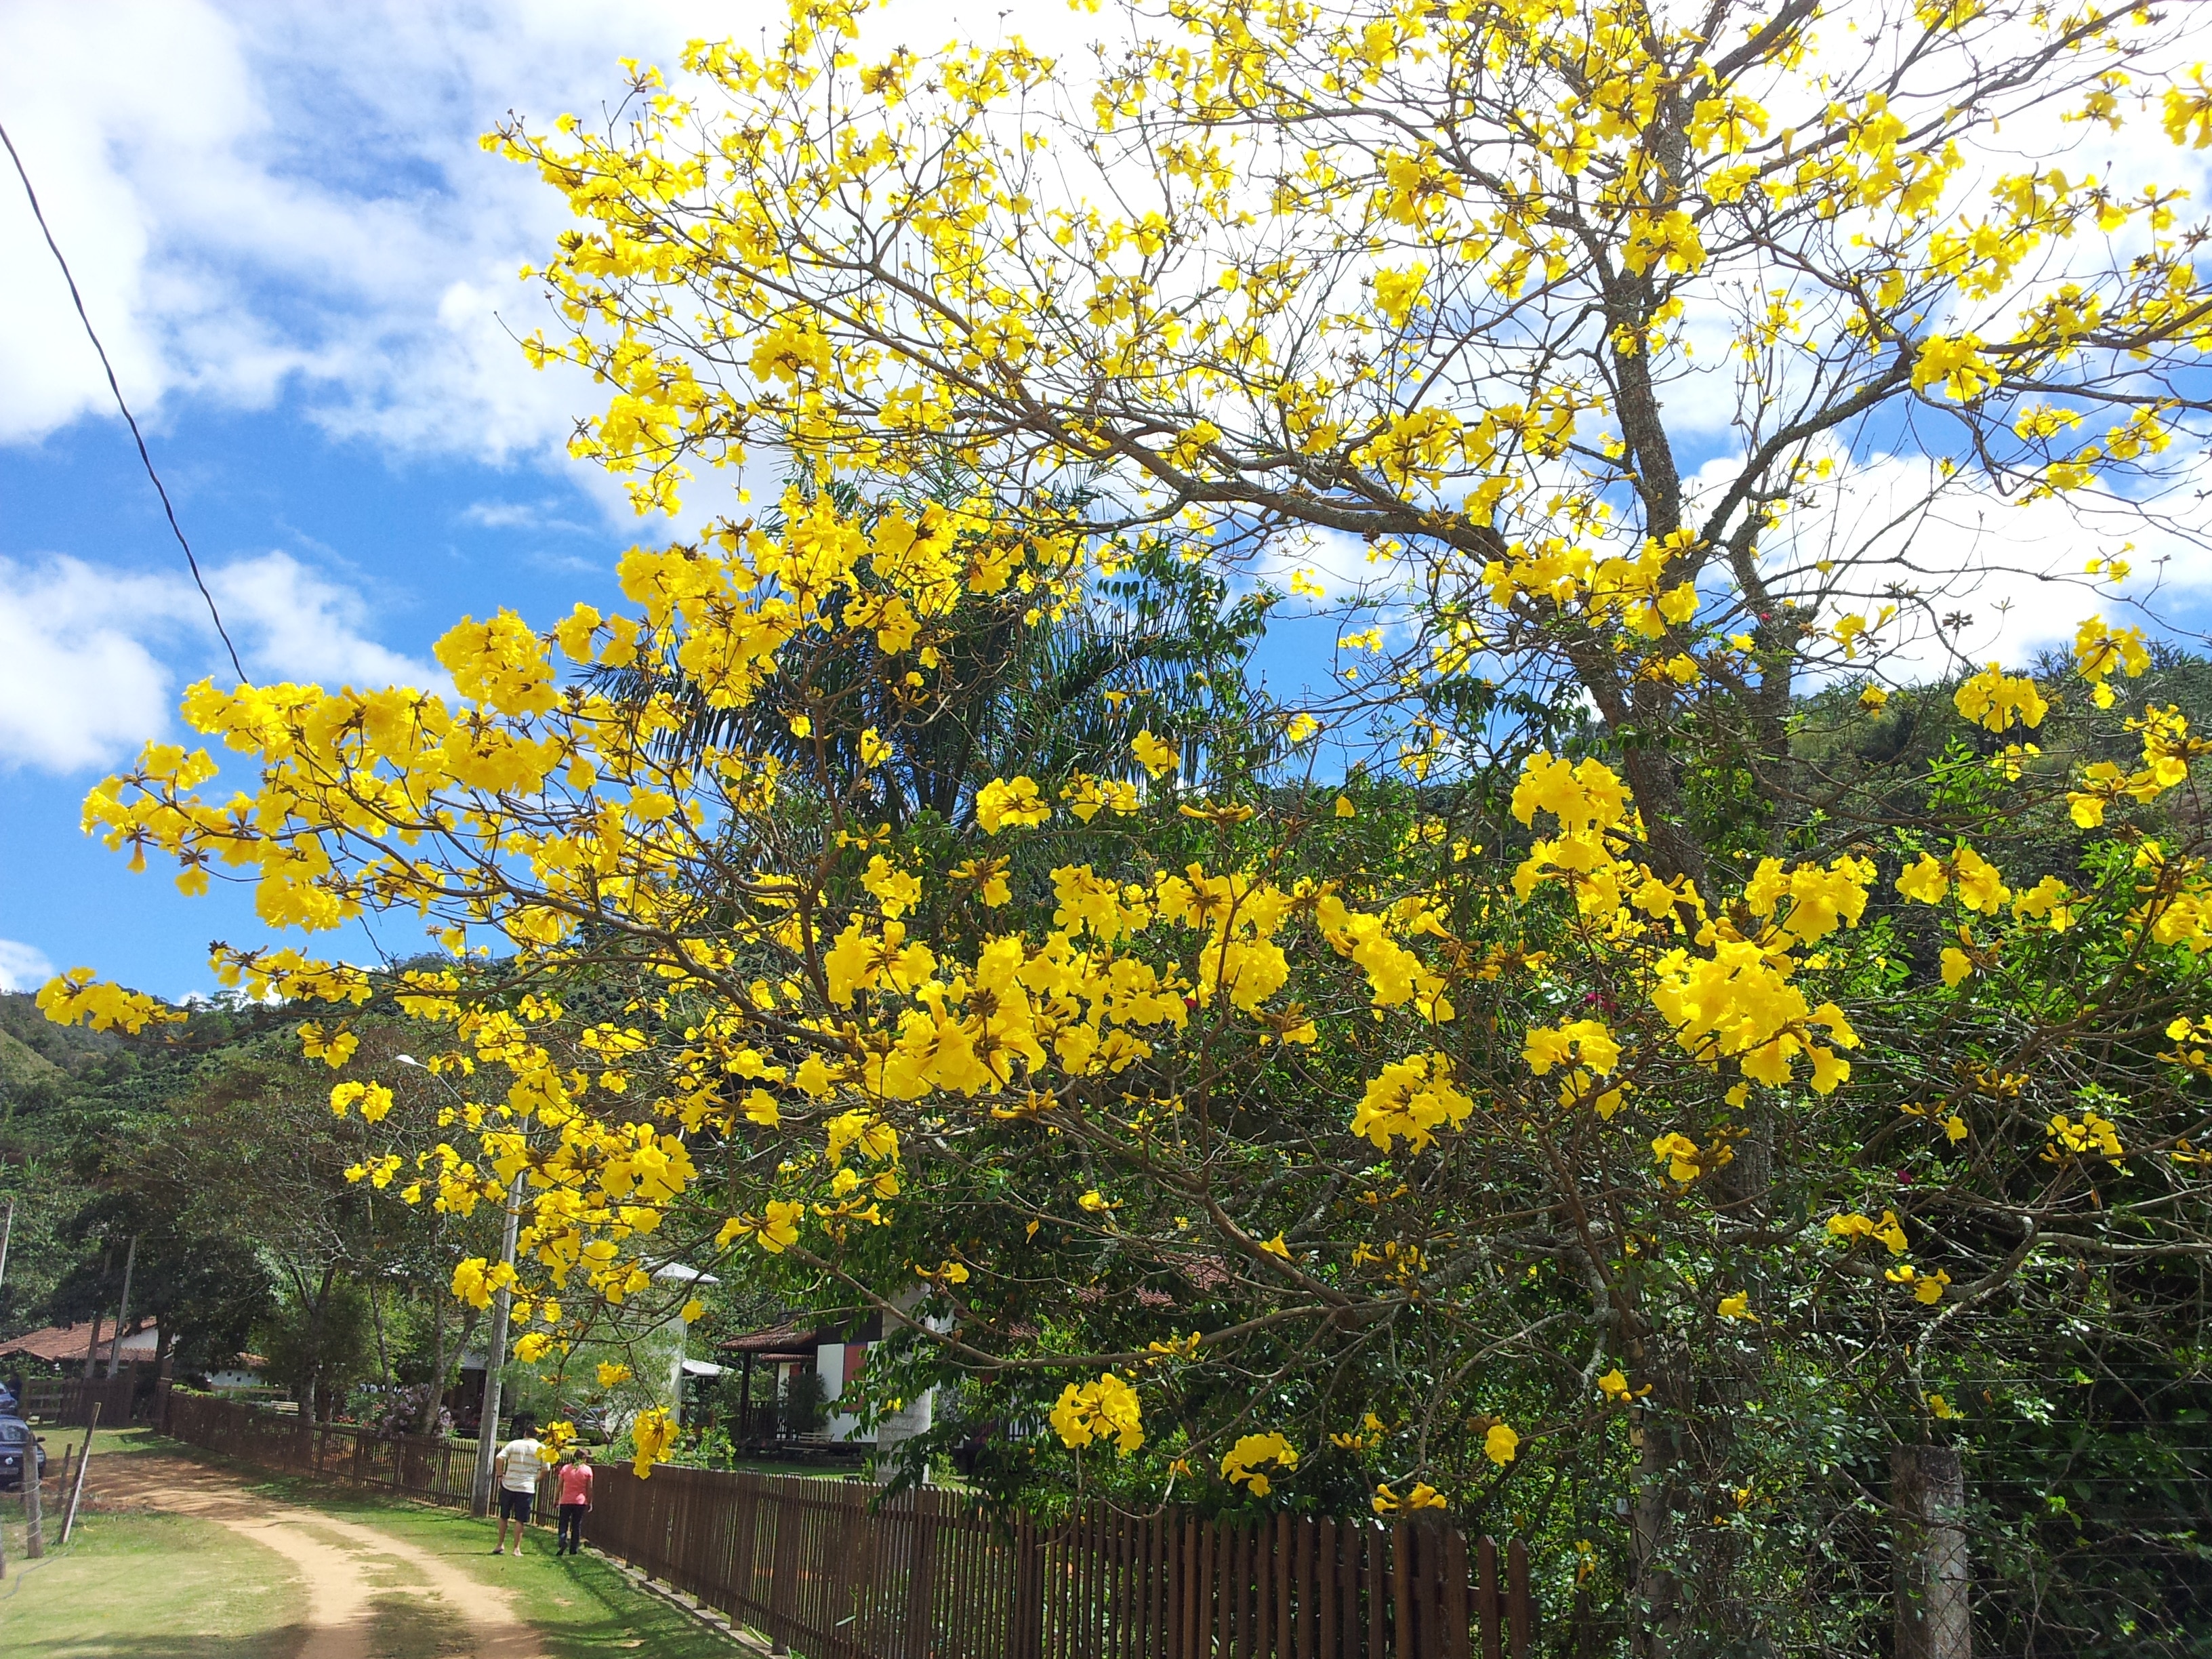 tree blooms yellow flowers during daytime